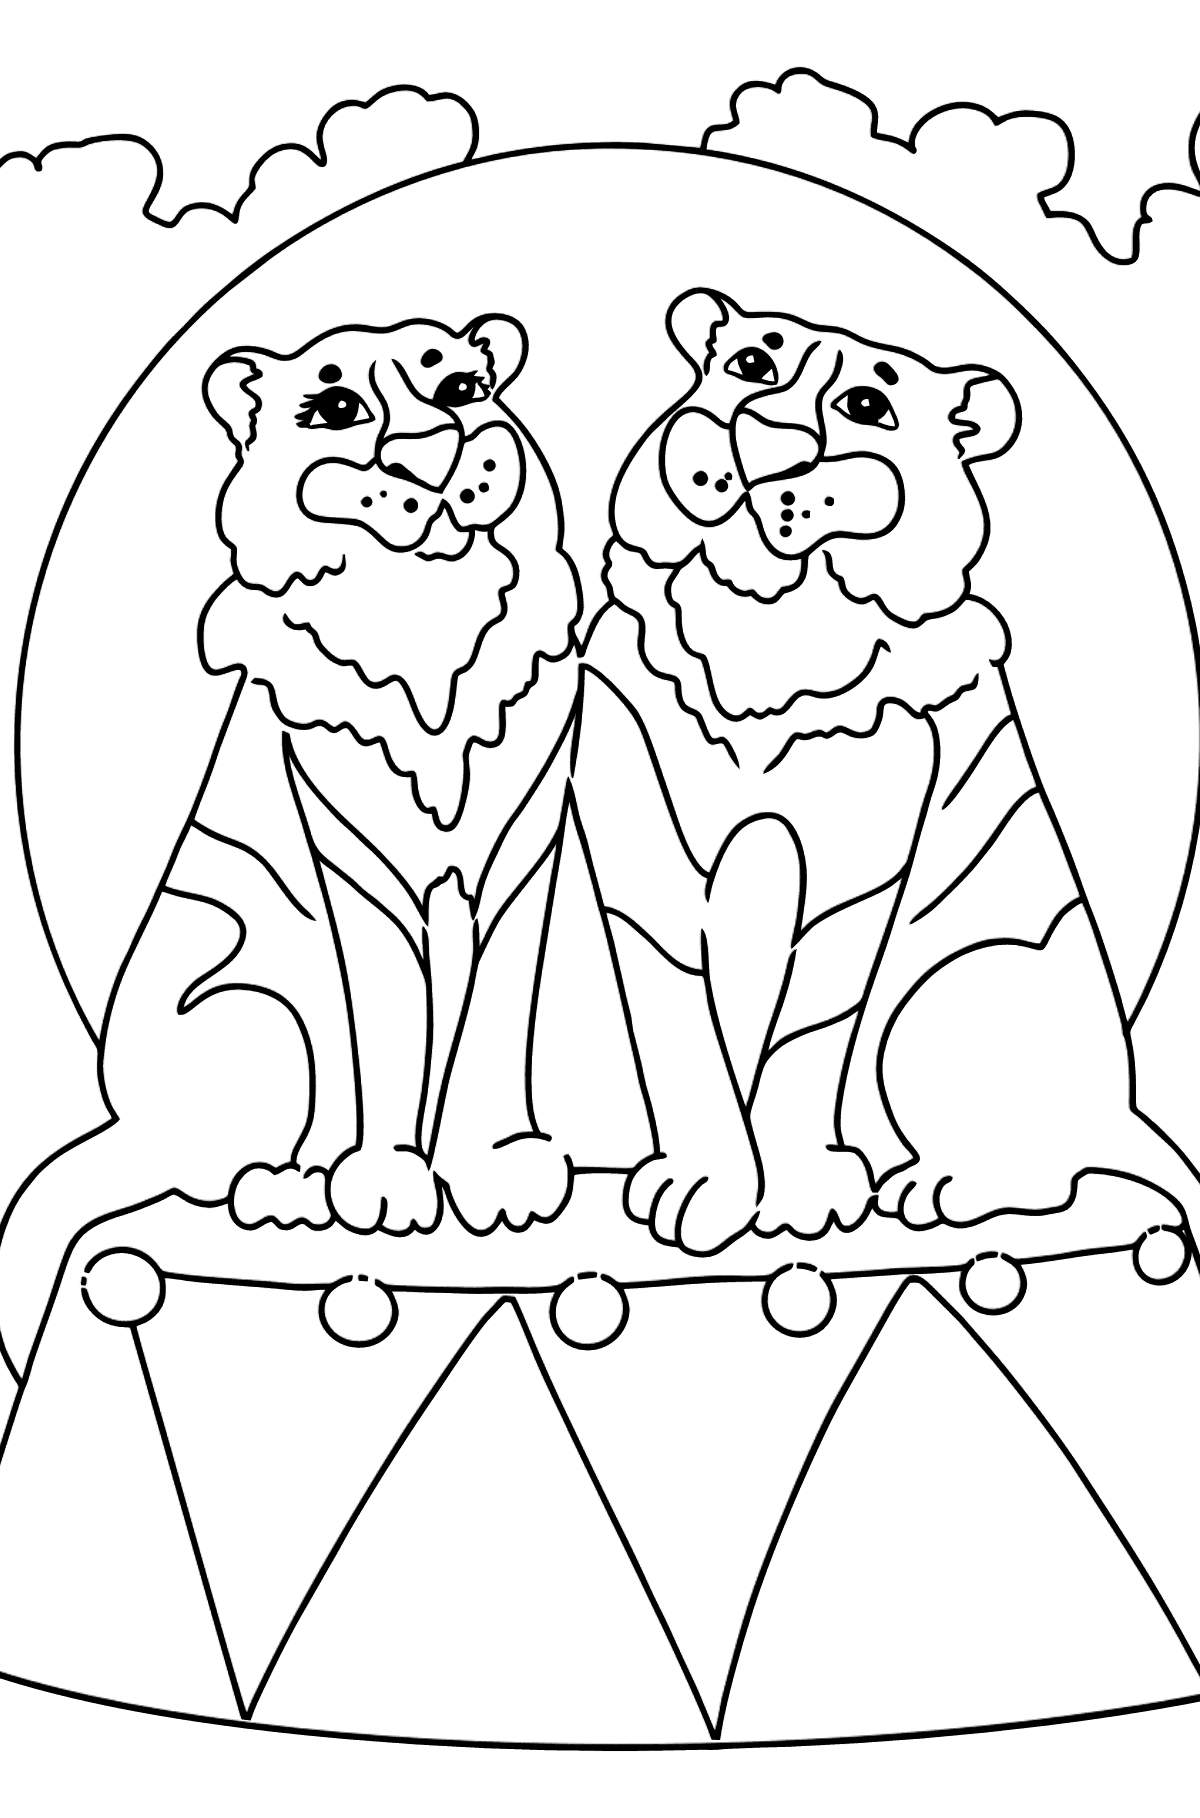 Coloring Page - A Tiger in a Circus - Coloring Pages for Kids